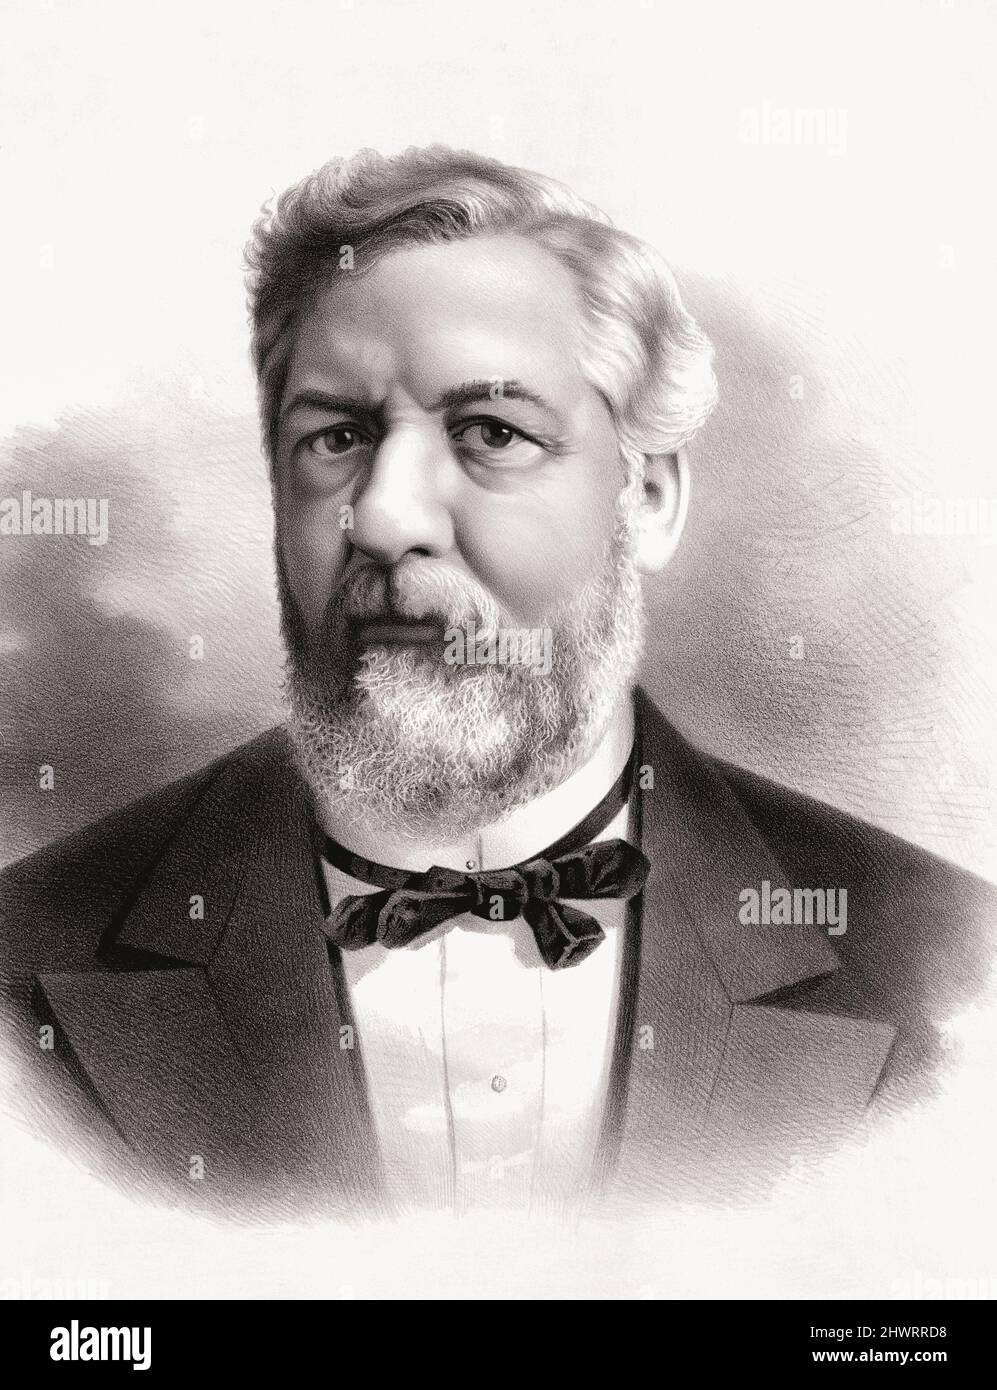 James Gillespie Blaine, 1839 - 1893.  American politician and senator. He twice served as Secretary of State.  After a 19th century portrait. Stock Photo